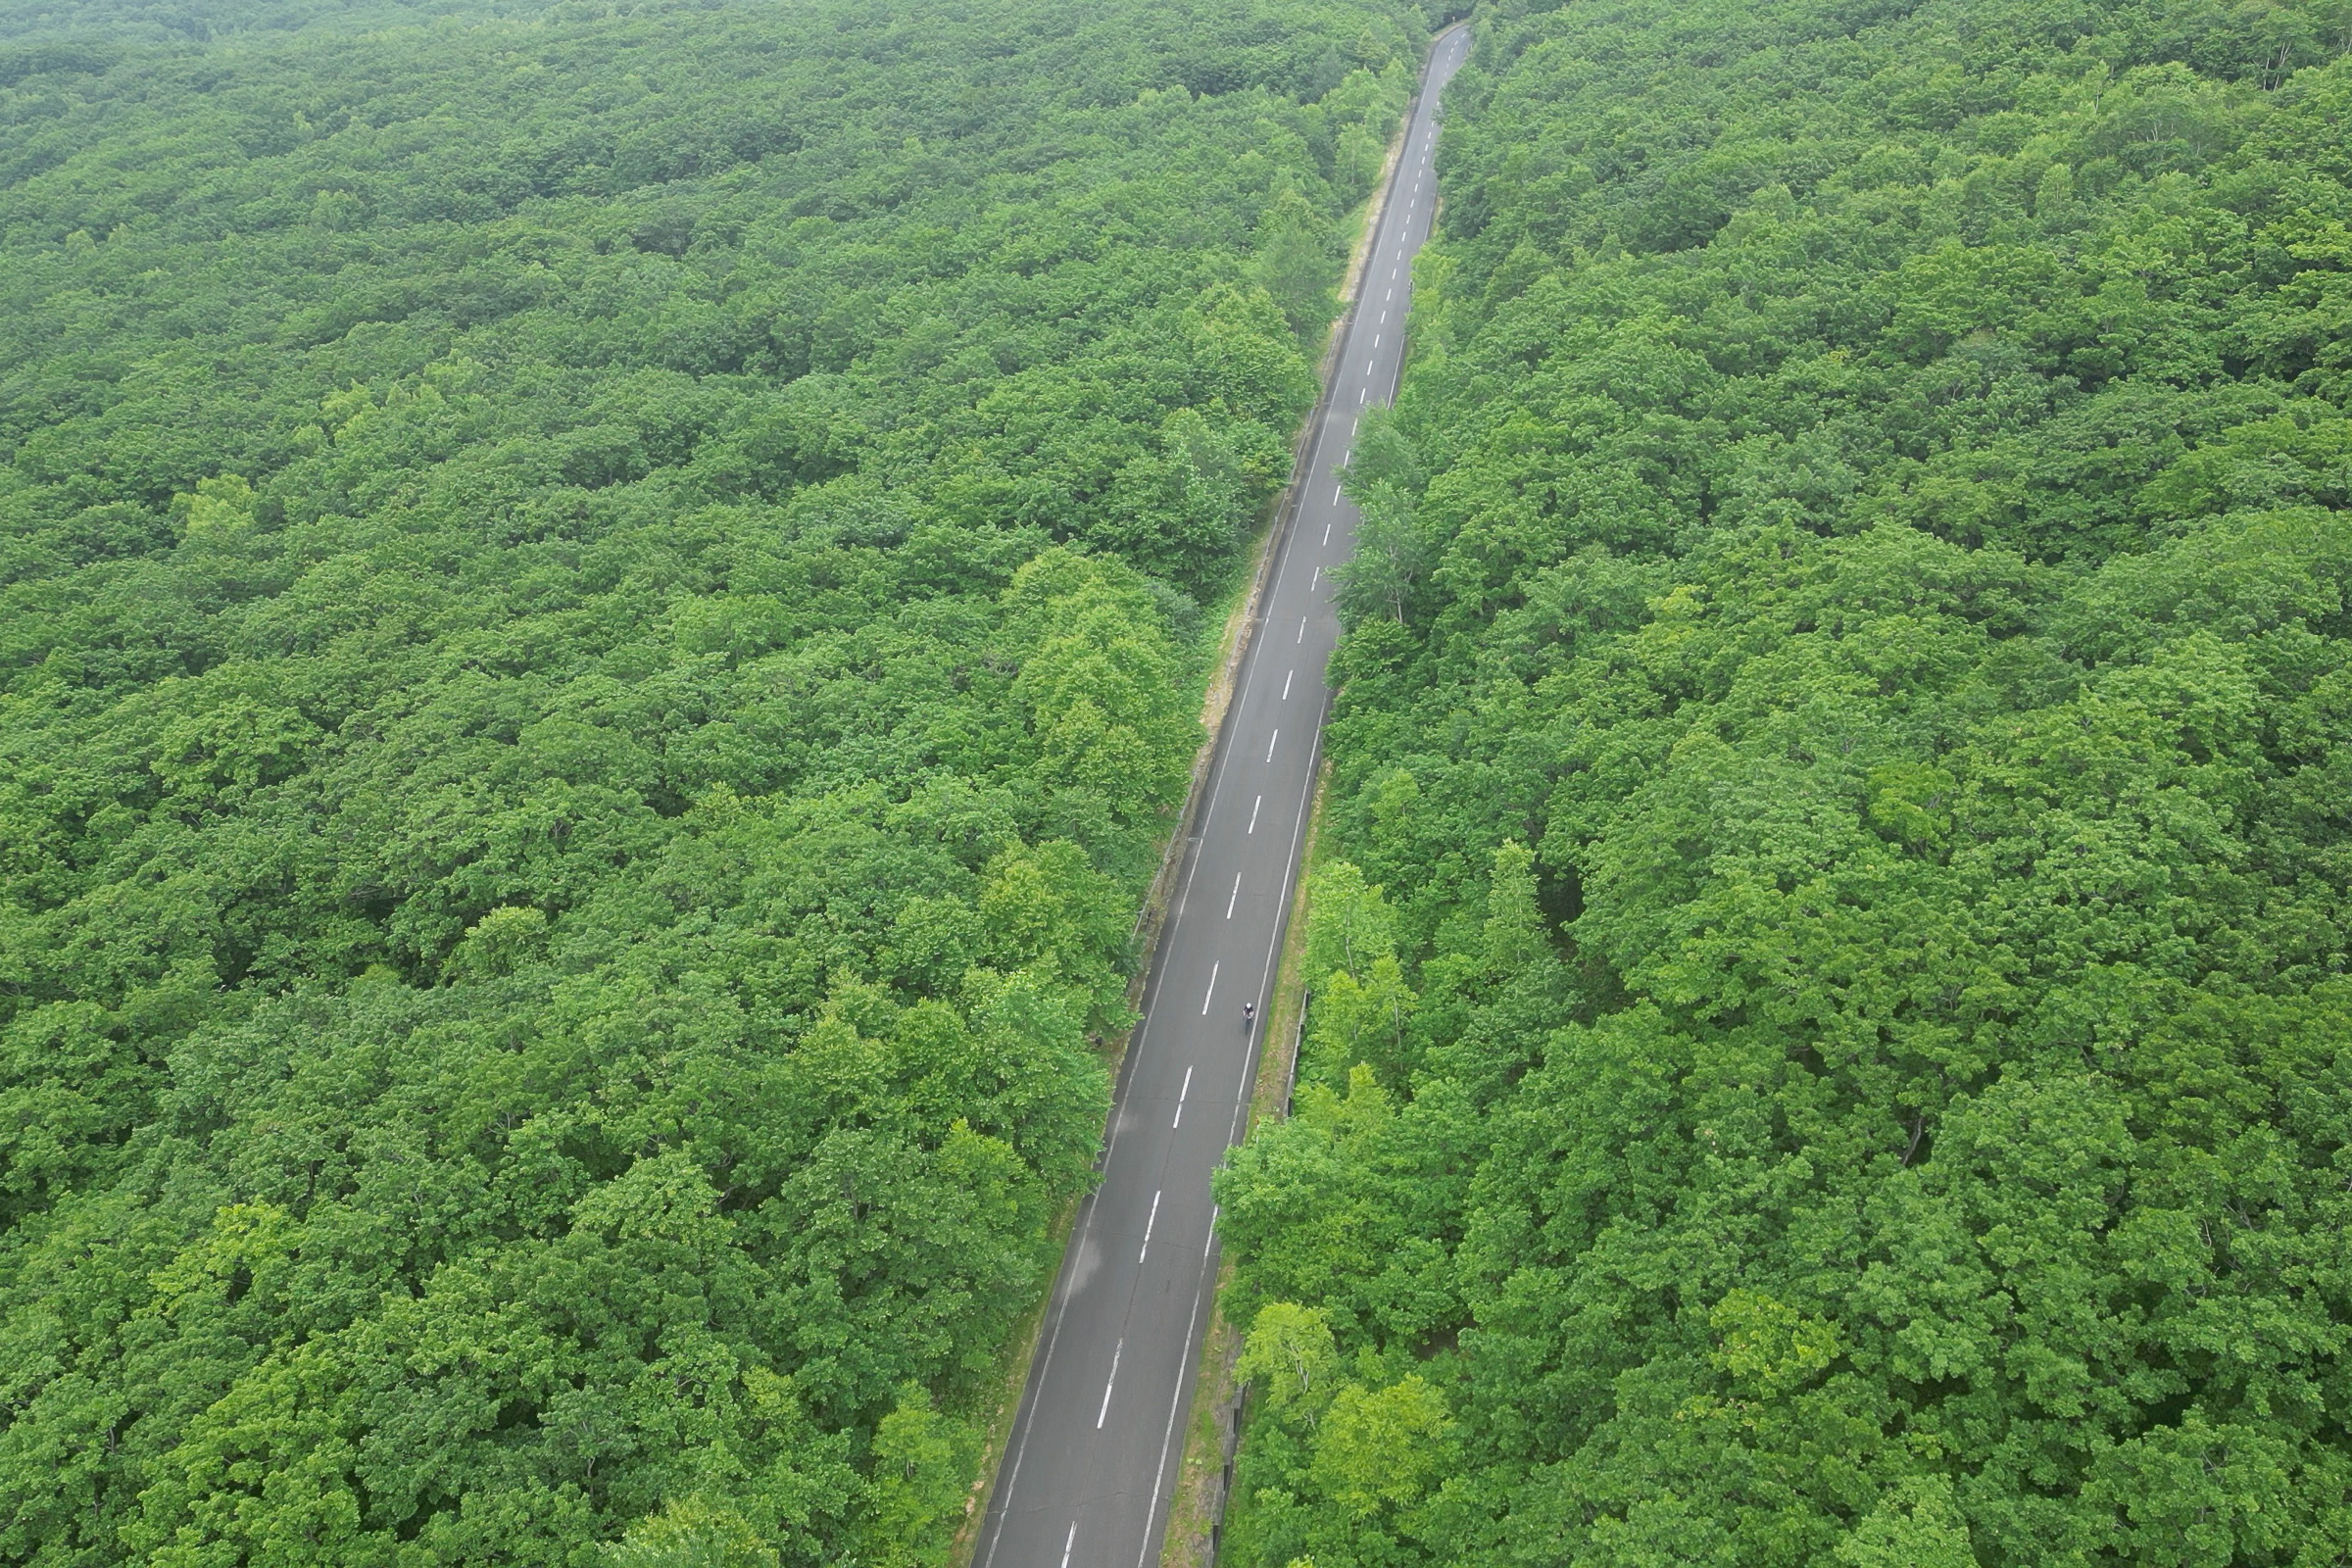 Capturing the Mikuni Pass road from the air.